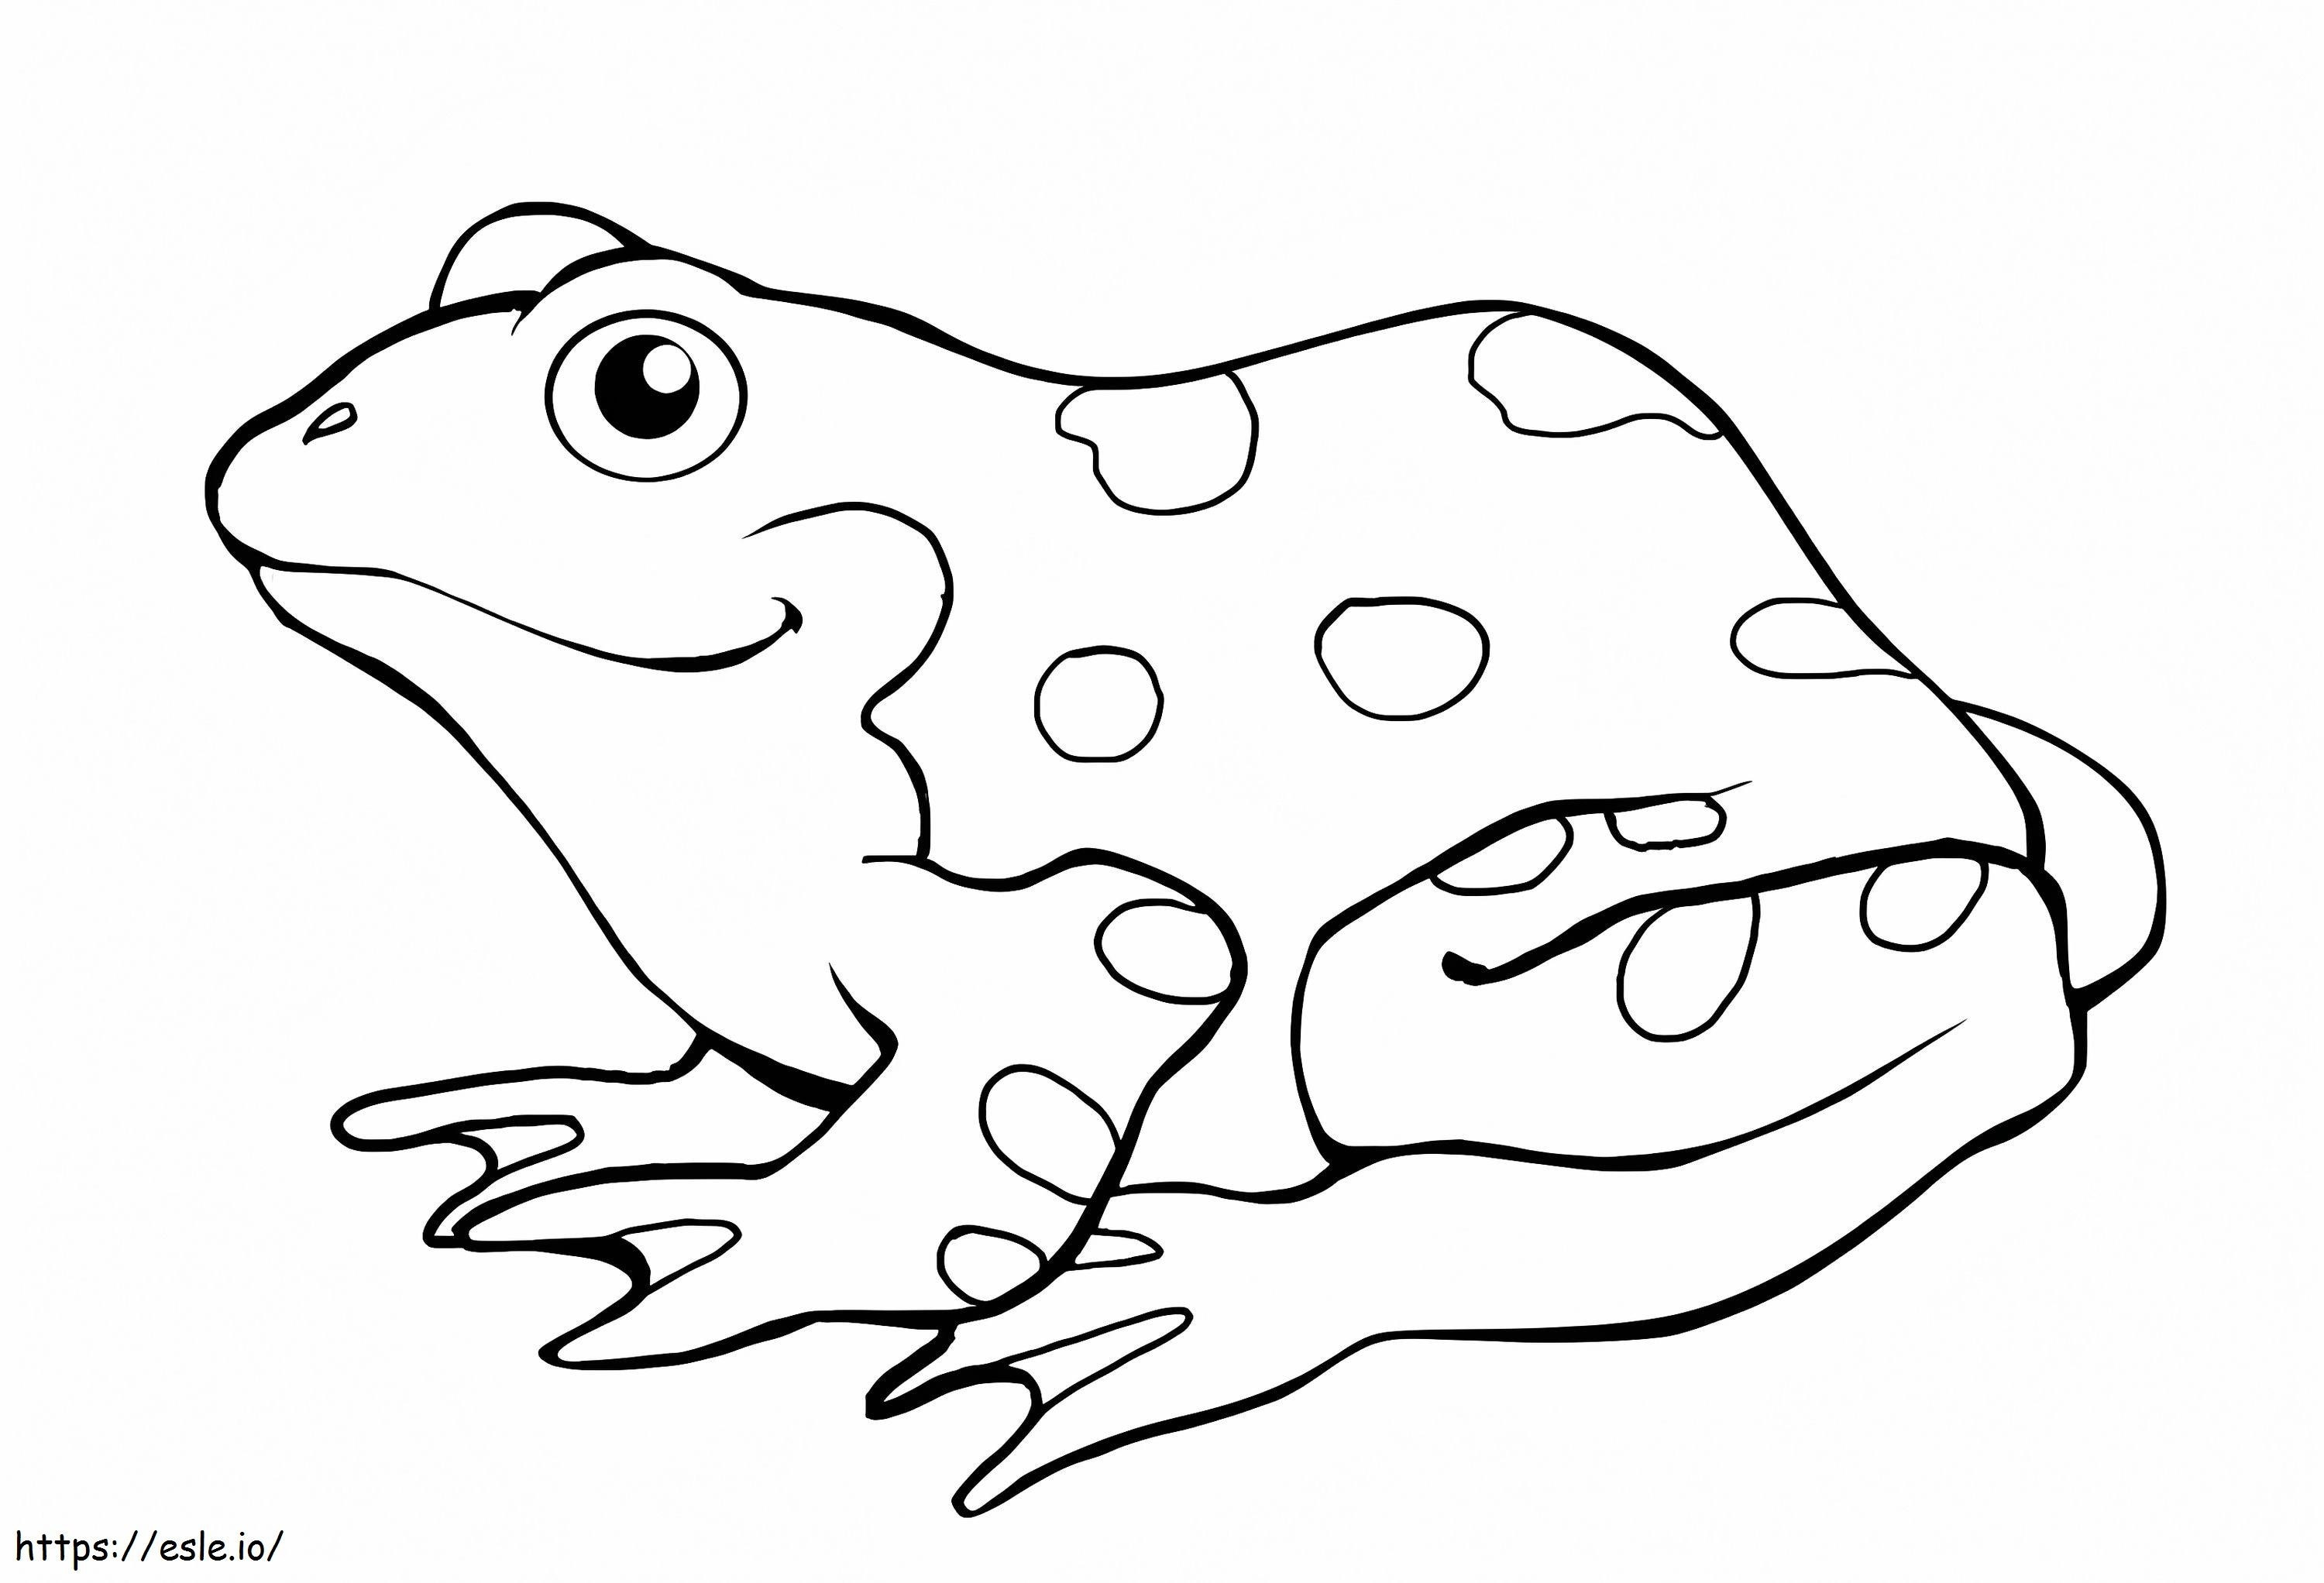 Simple Frog coloring page